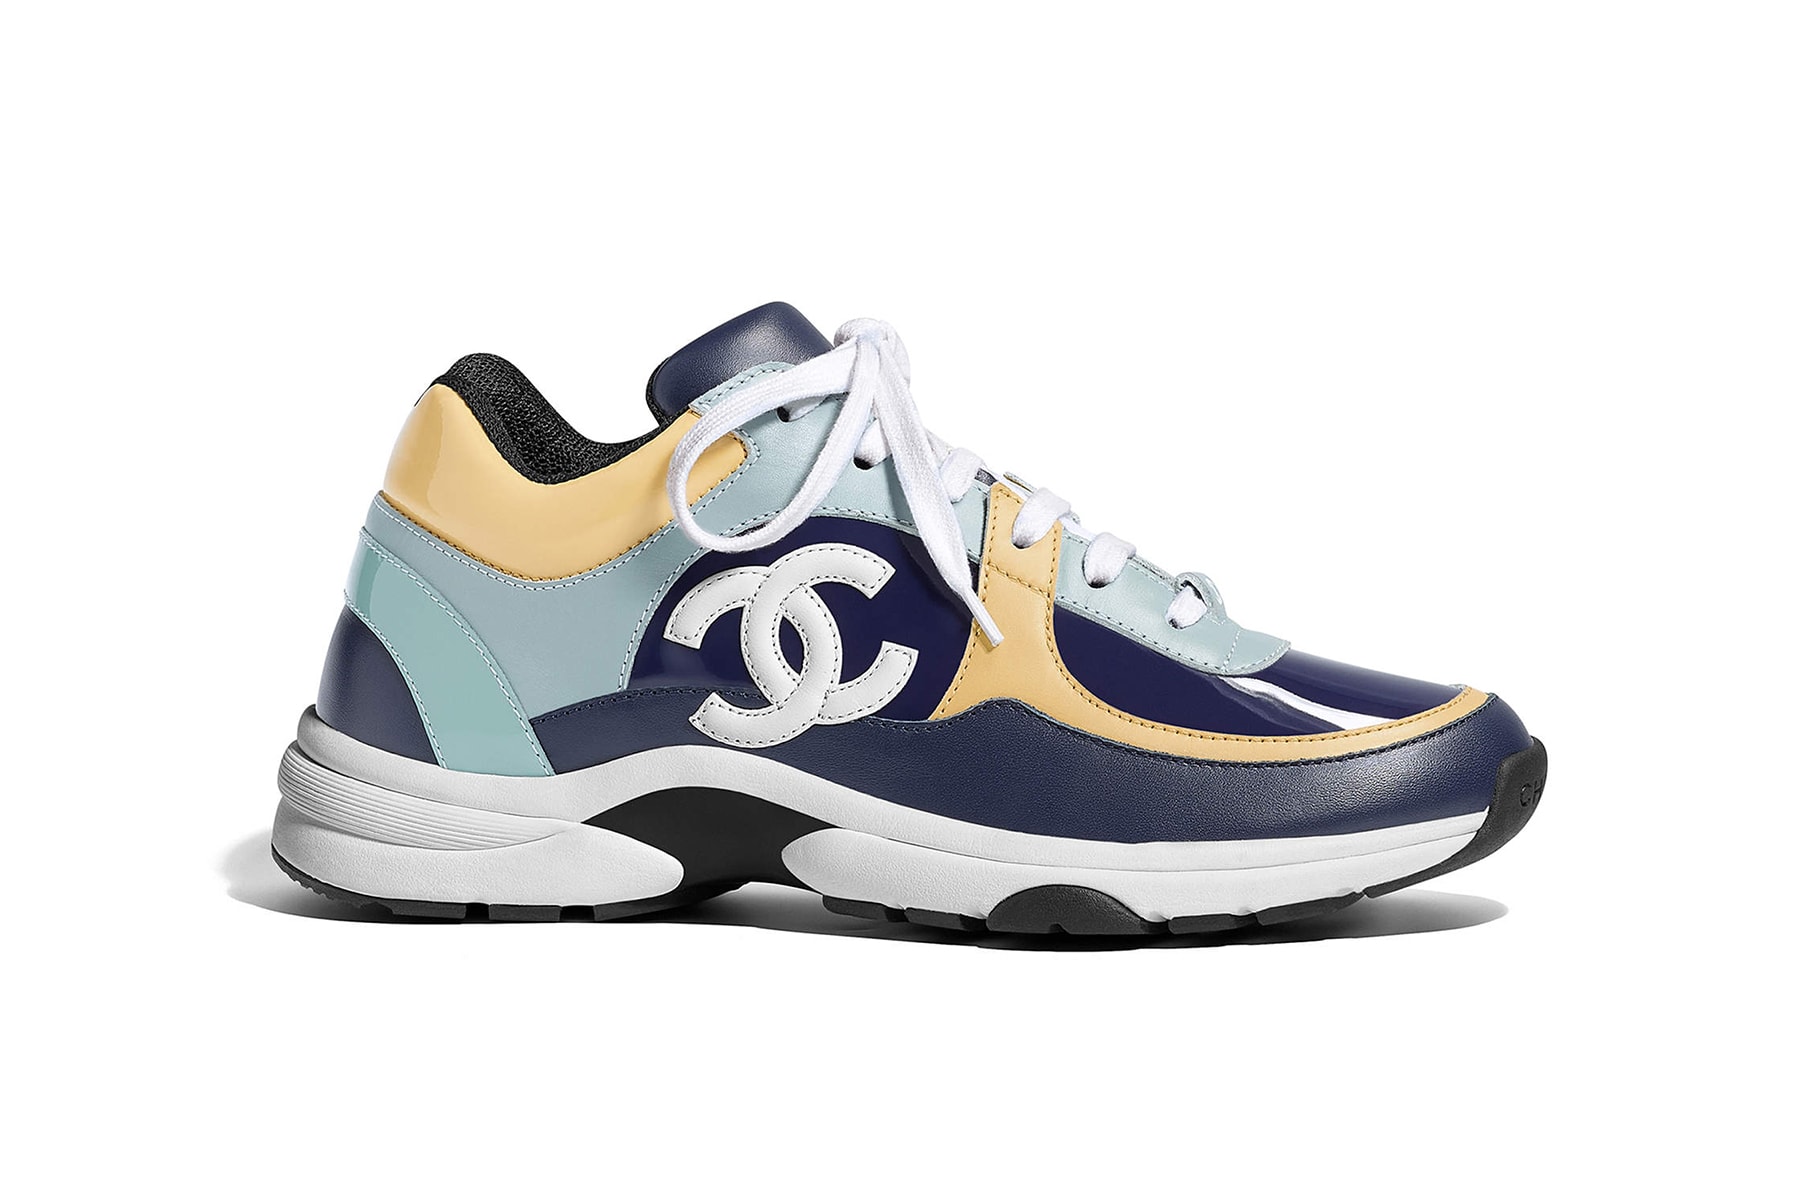 Chanel Spring Summer 2018 Sneaker Collection Colorways Release Price Where to Buy Blue Yellow Black White Low Trainer Karl Lagerfeld Double C Logo